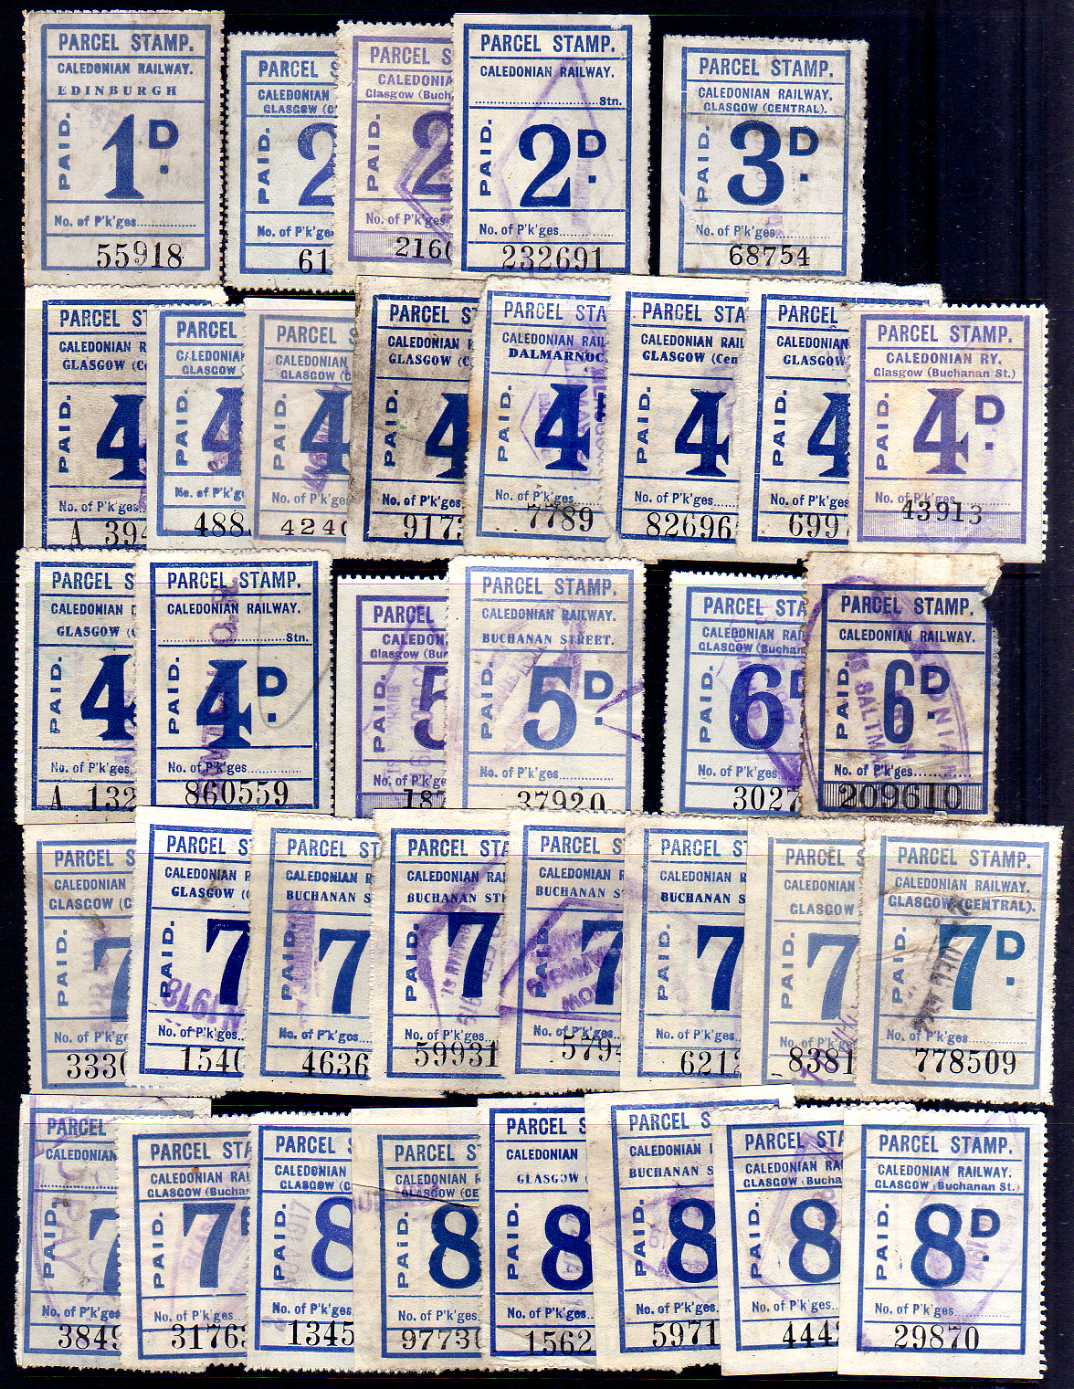 CALEDONIAN RAILWAY: 1902 ONWARDS BLUE PARCEL STAMPS MAINLY USED SELECTION, - Image 2 of 5